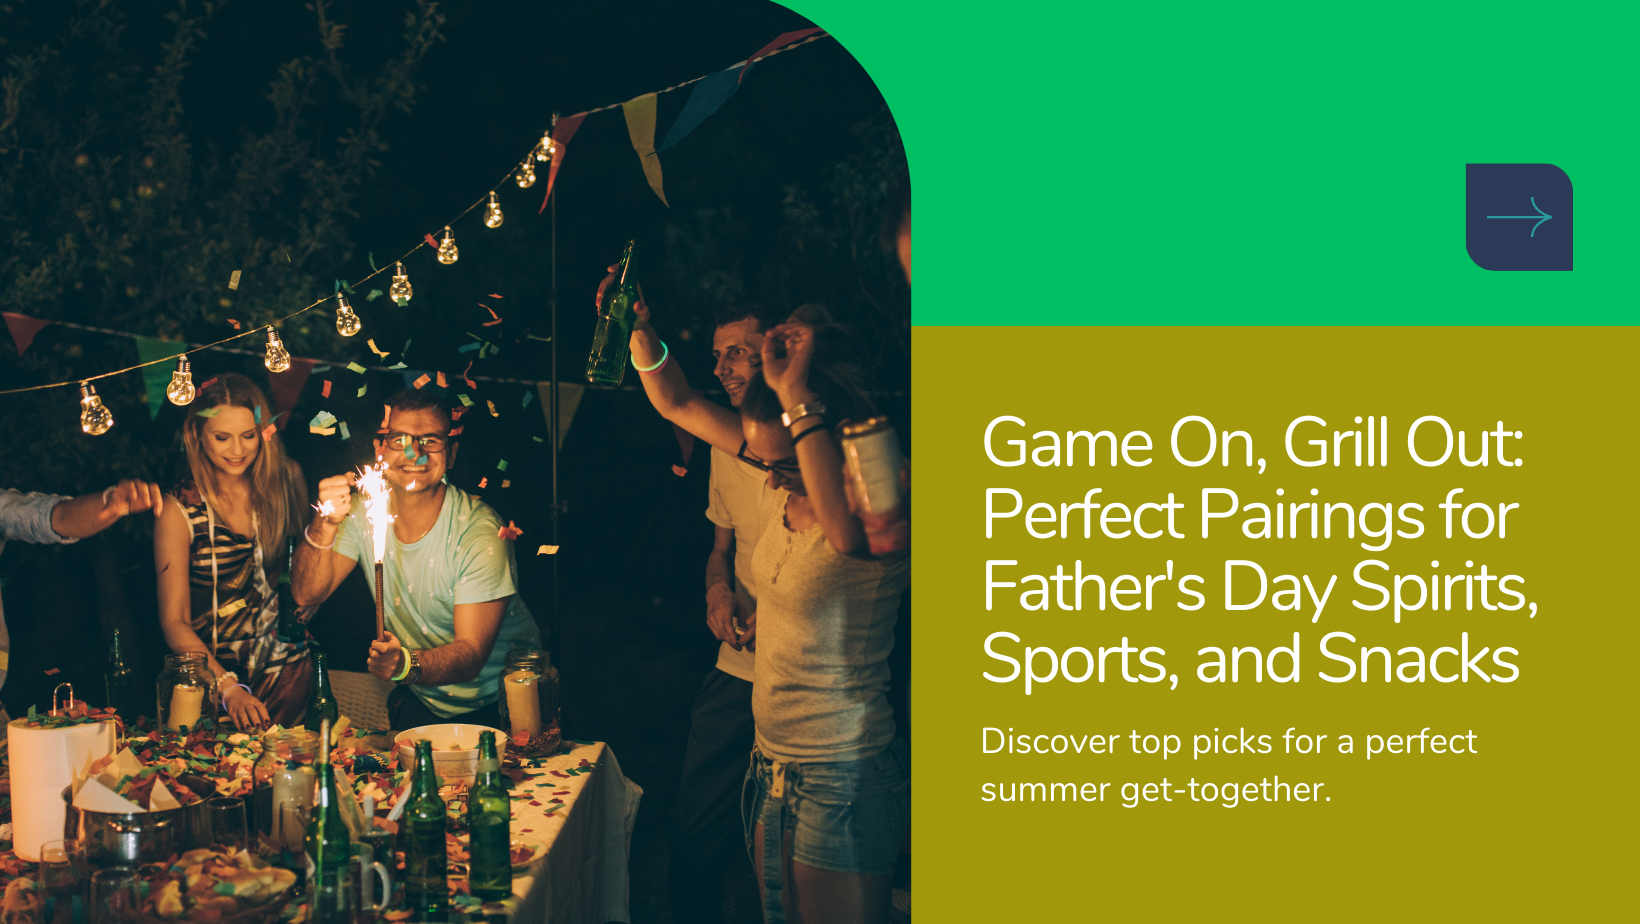 Game On, Grill Out: Perfect Pairings for Father’s Day Spirits, Sports, and Snacks